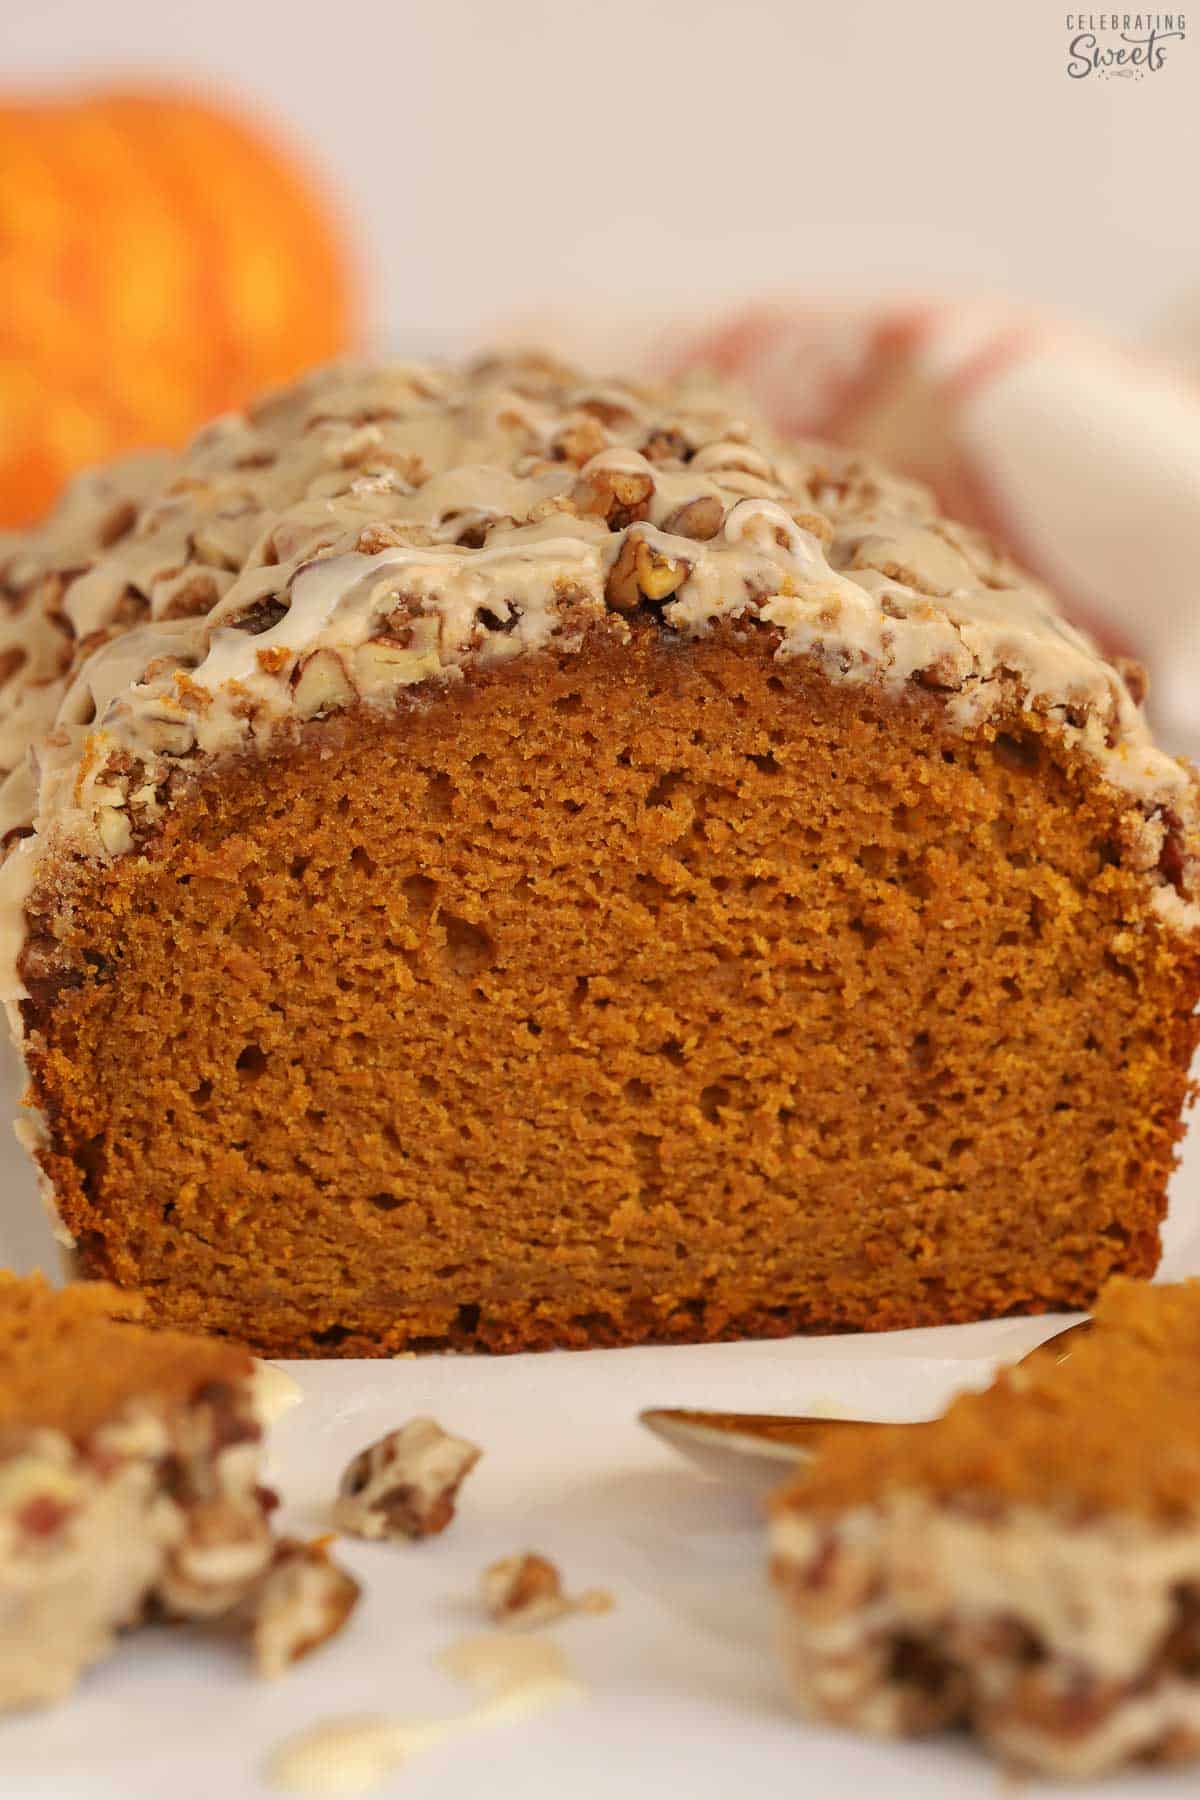 Loaf of pumpkin bread topped with nuts and icing.